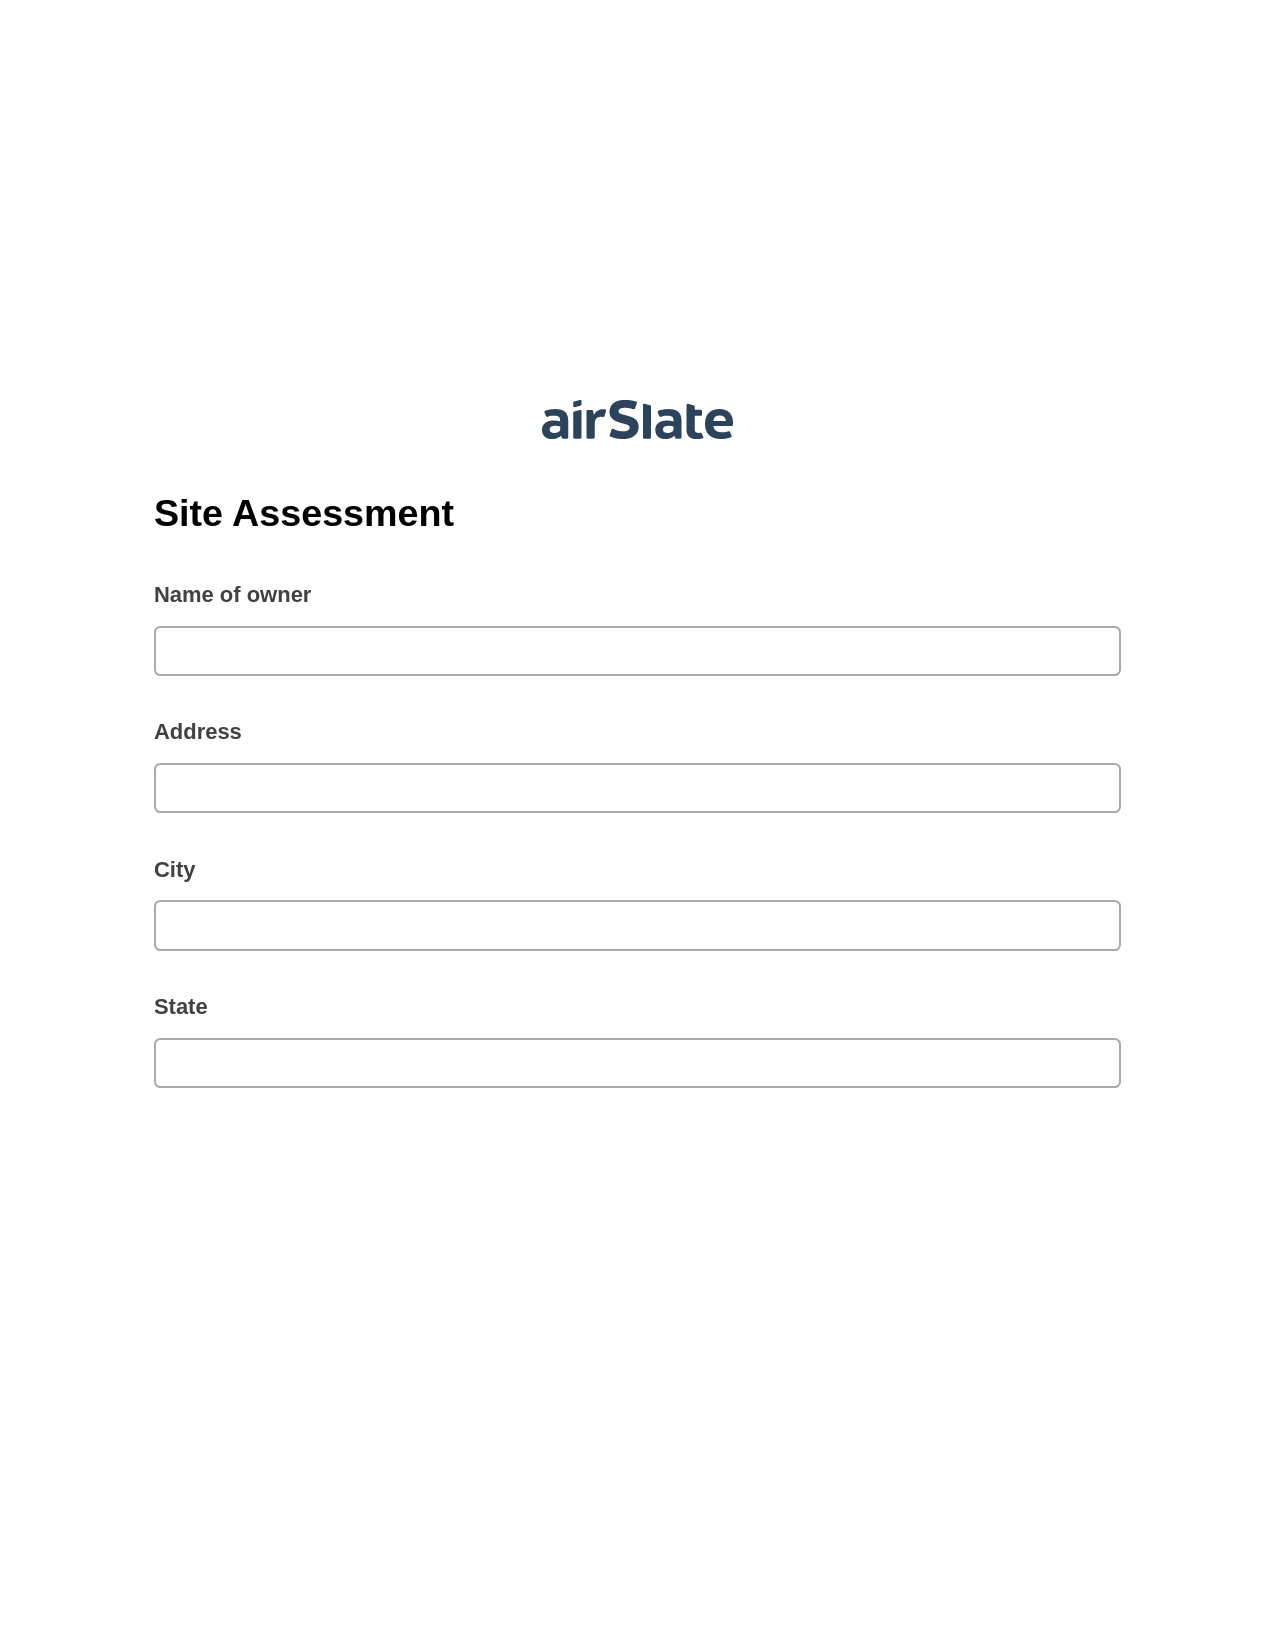 Multirole Site Assessment Pre-fill Slate from MS Dynamics 365 Records Bot, Audit Trail Bot, Export to Salesforce Bot